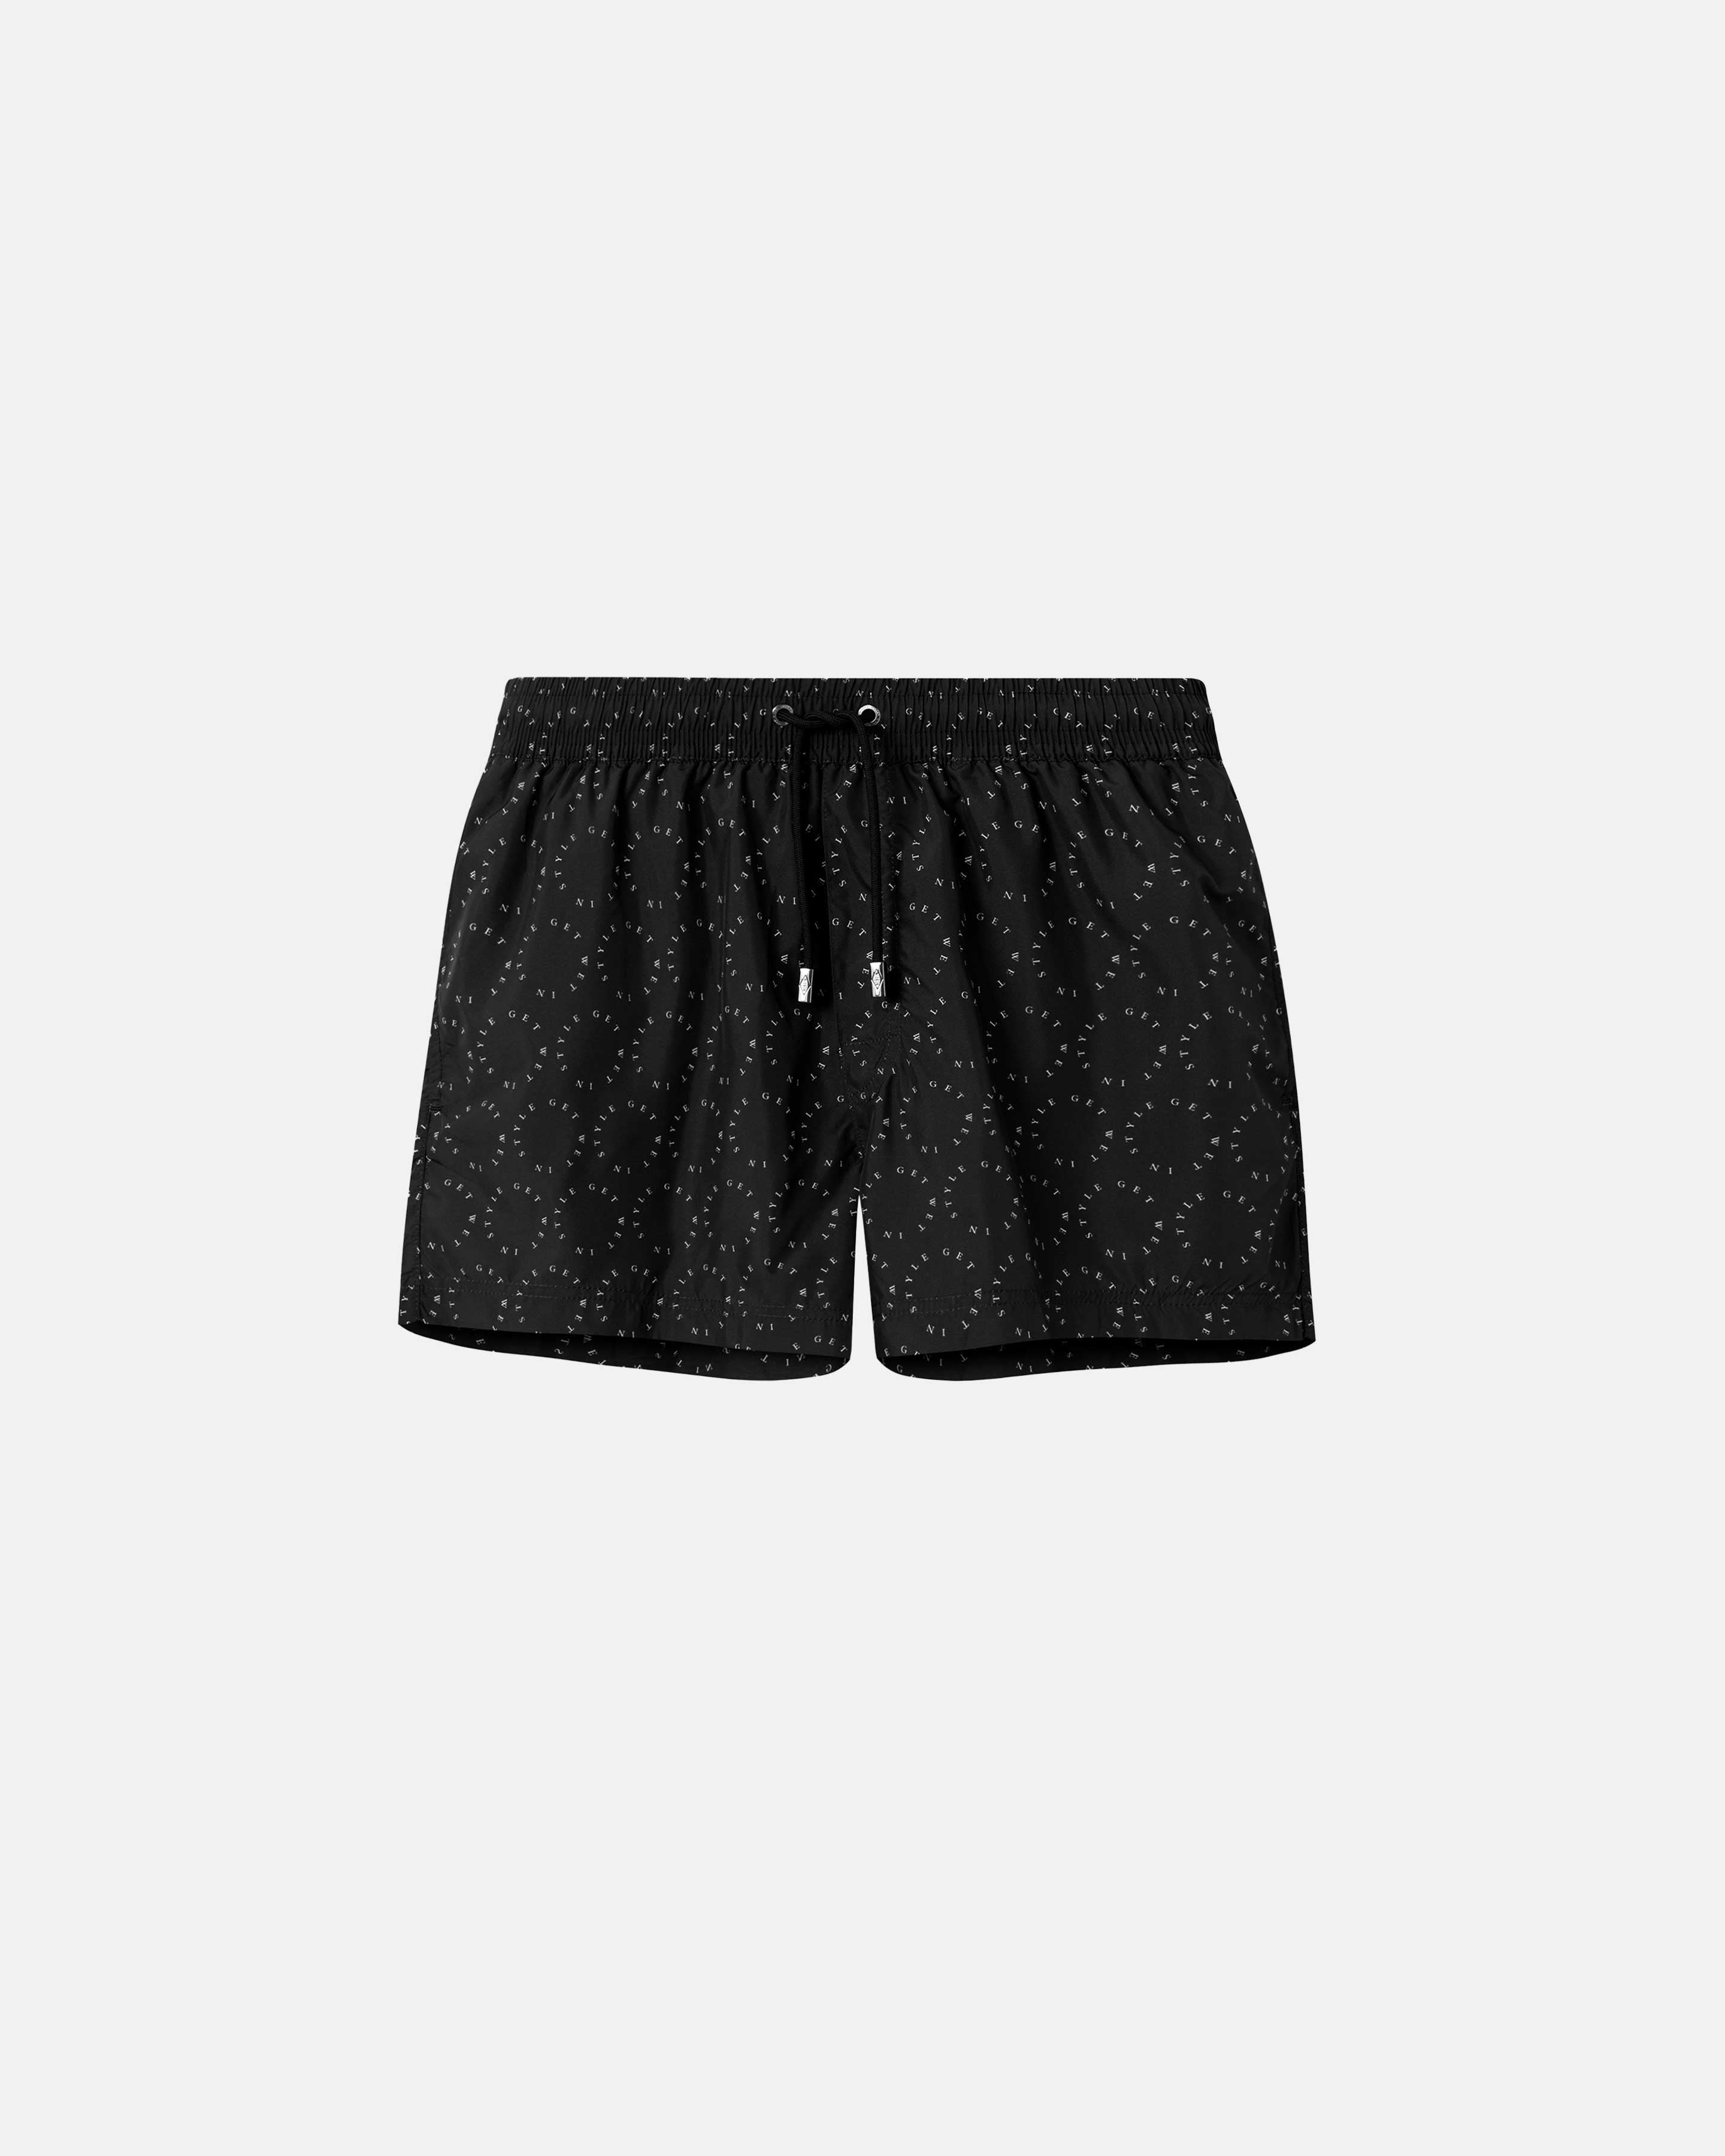 Black mid length swim trunks with white text